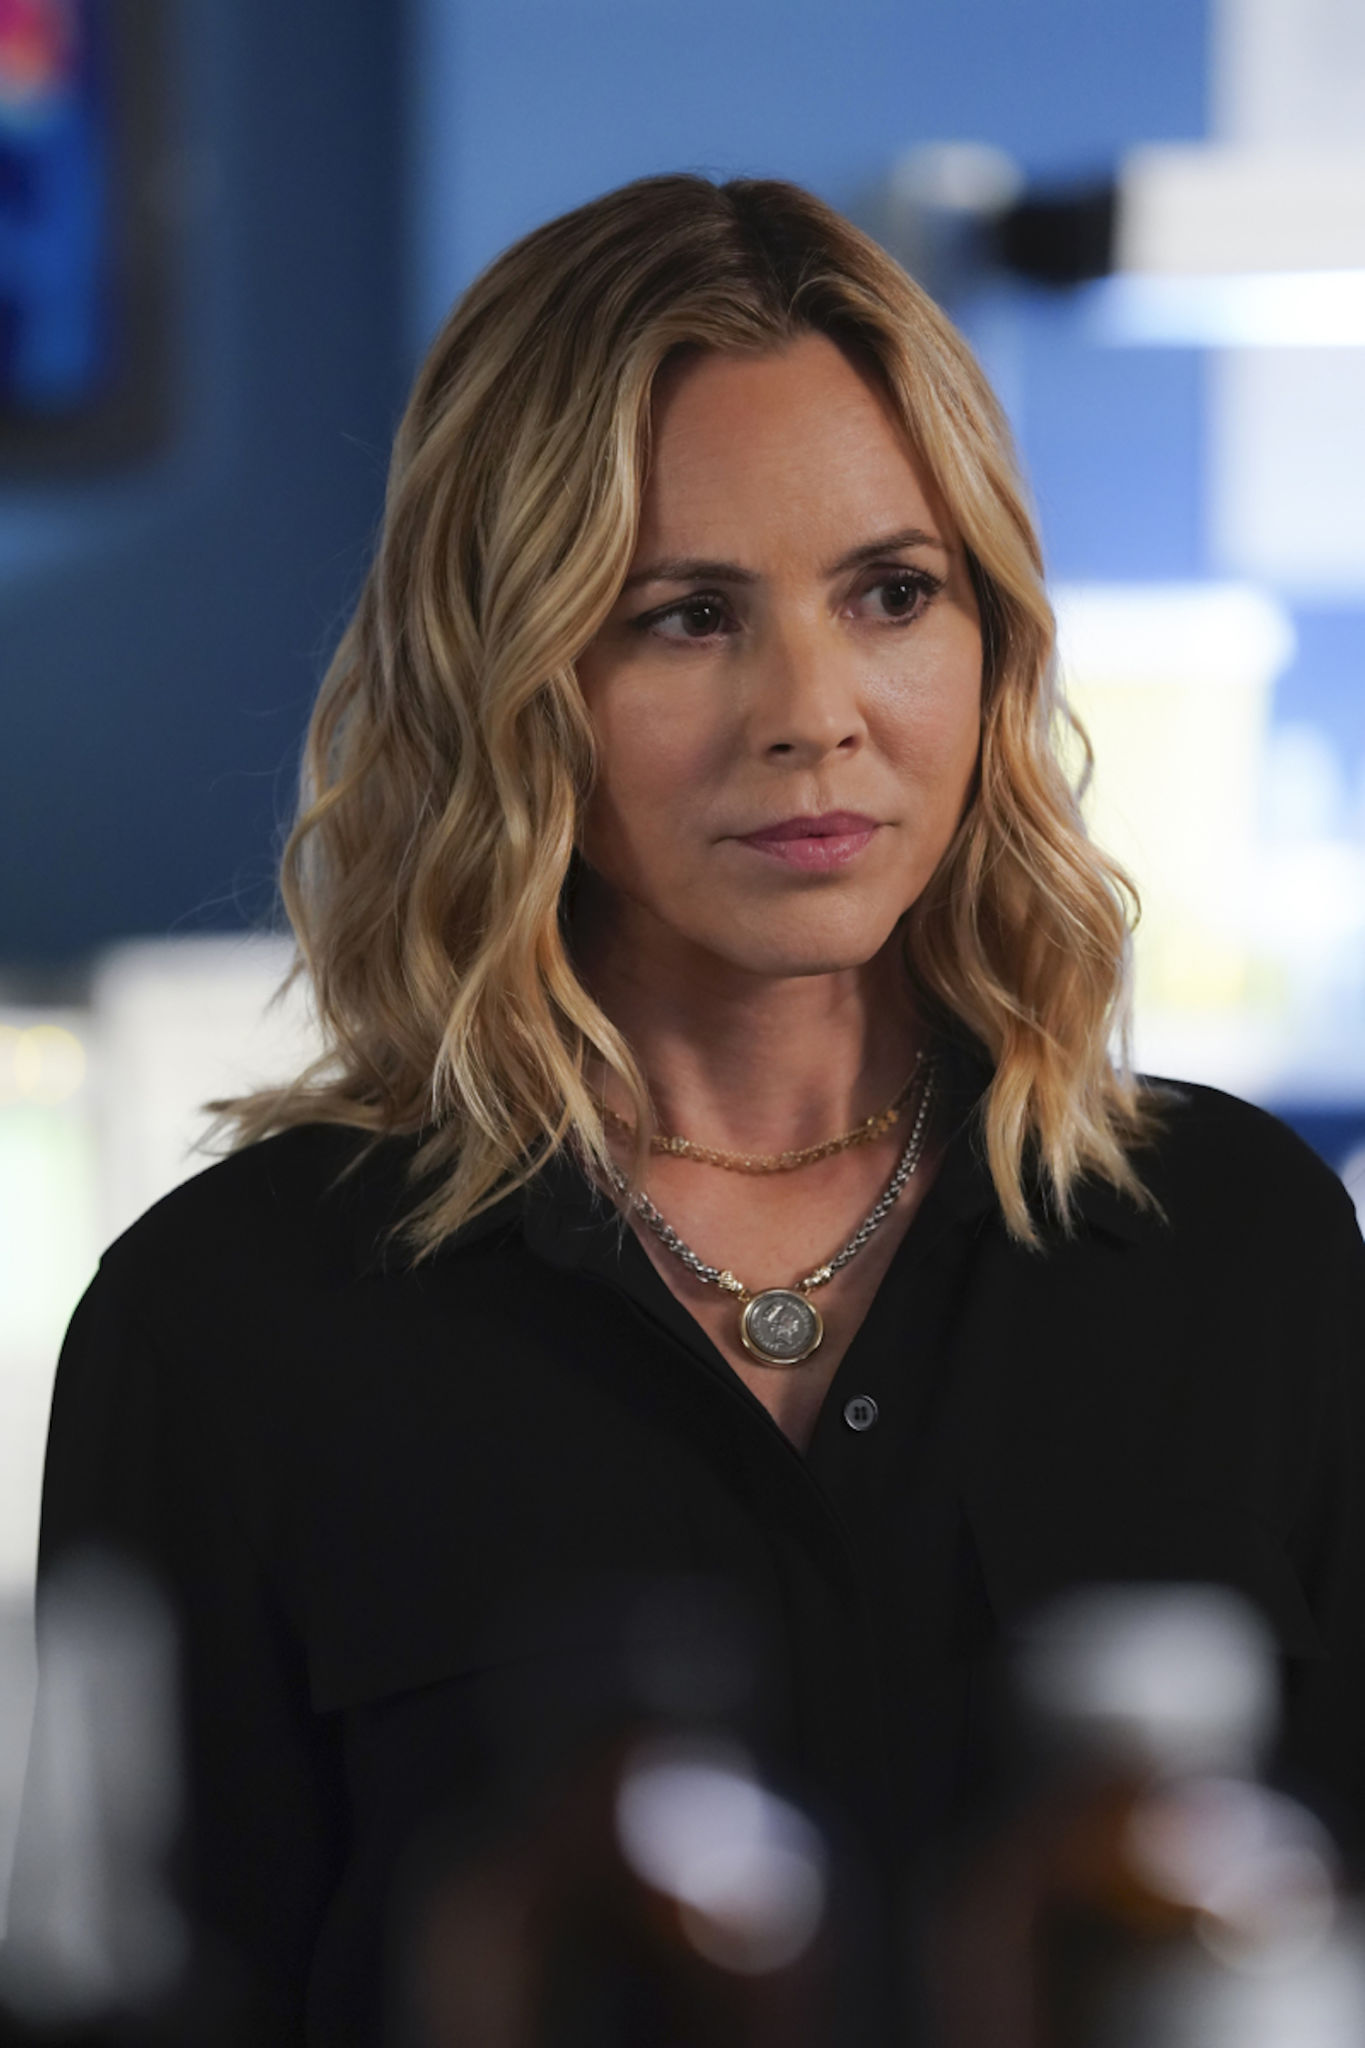 Maria Bello as Jack Sloane in NCIS - Out of the Darkness